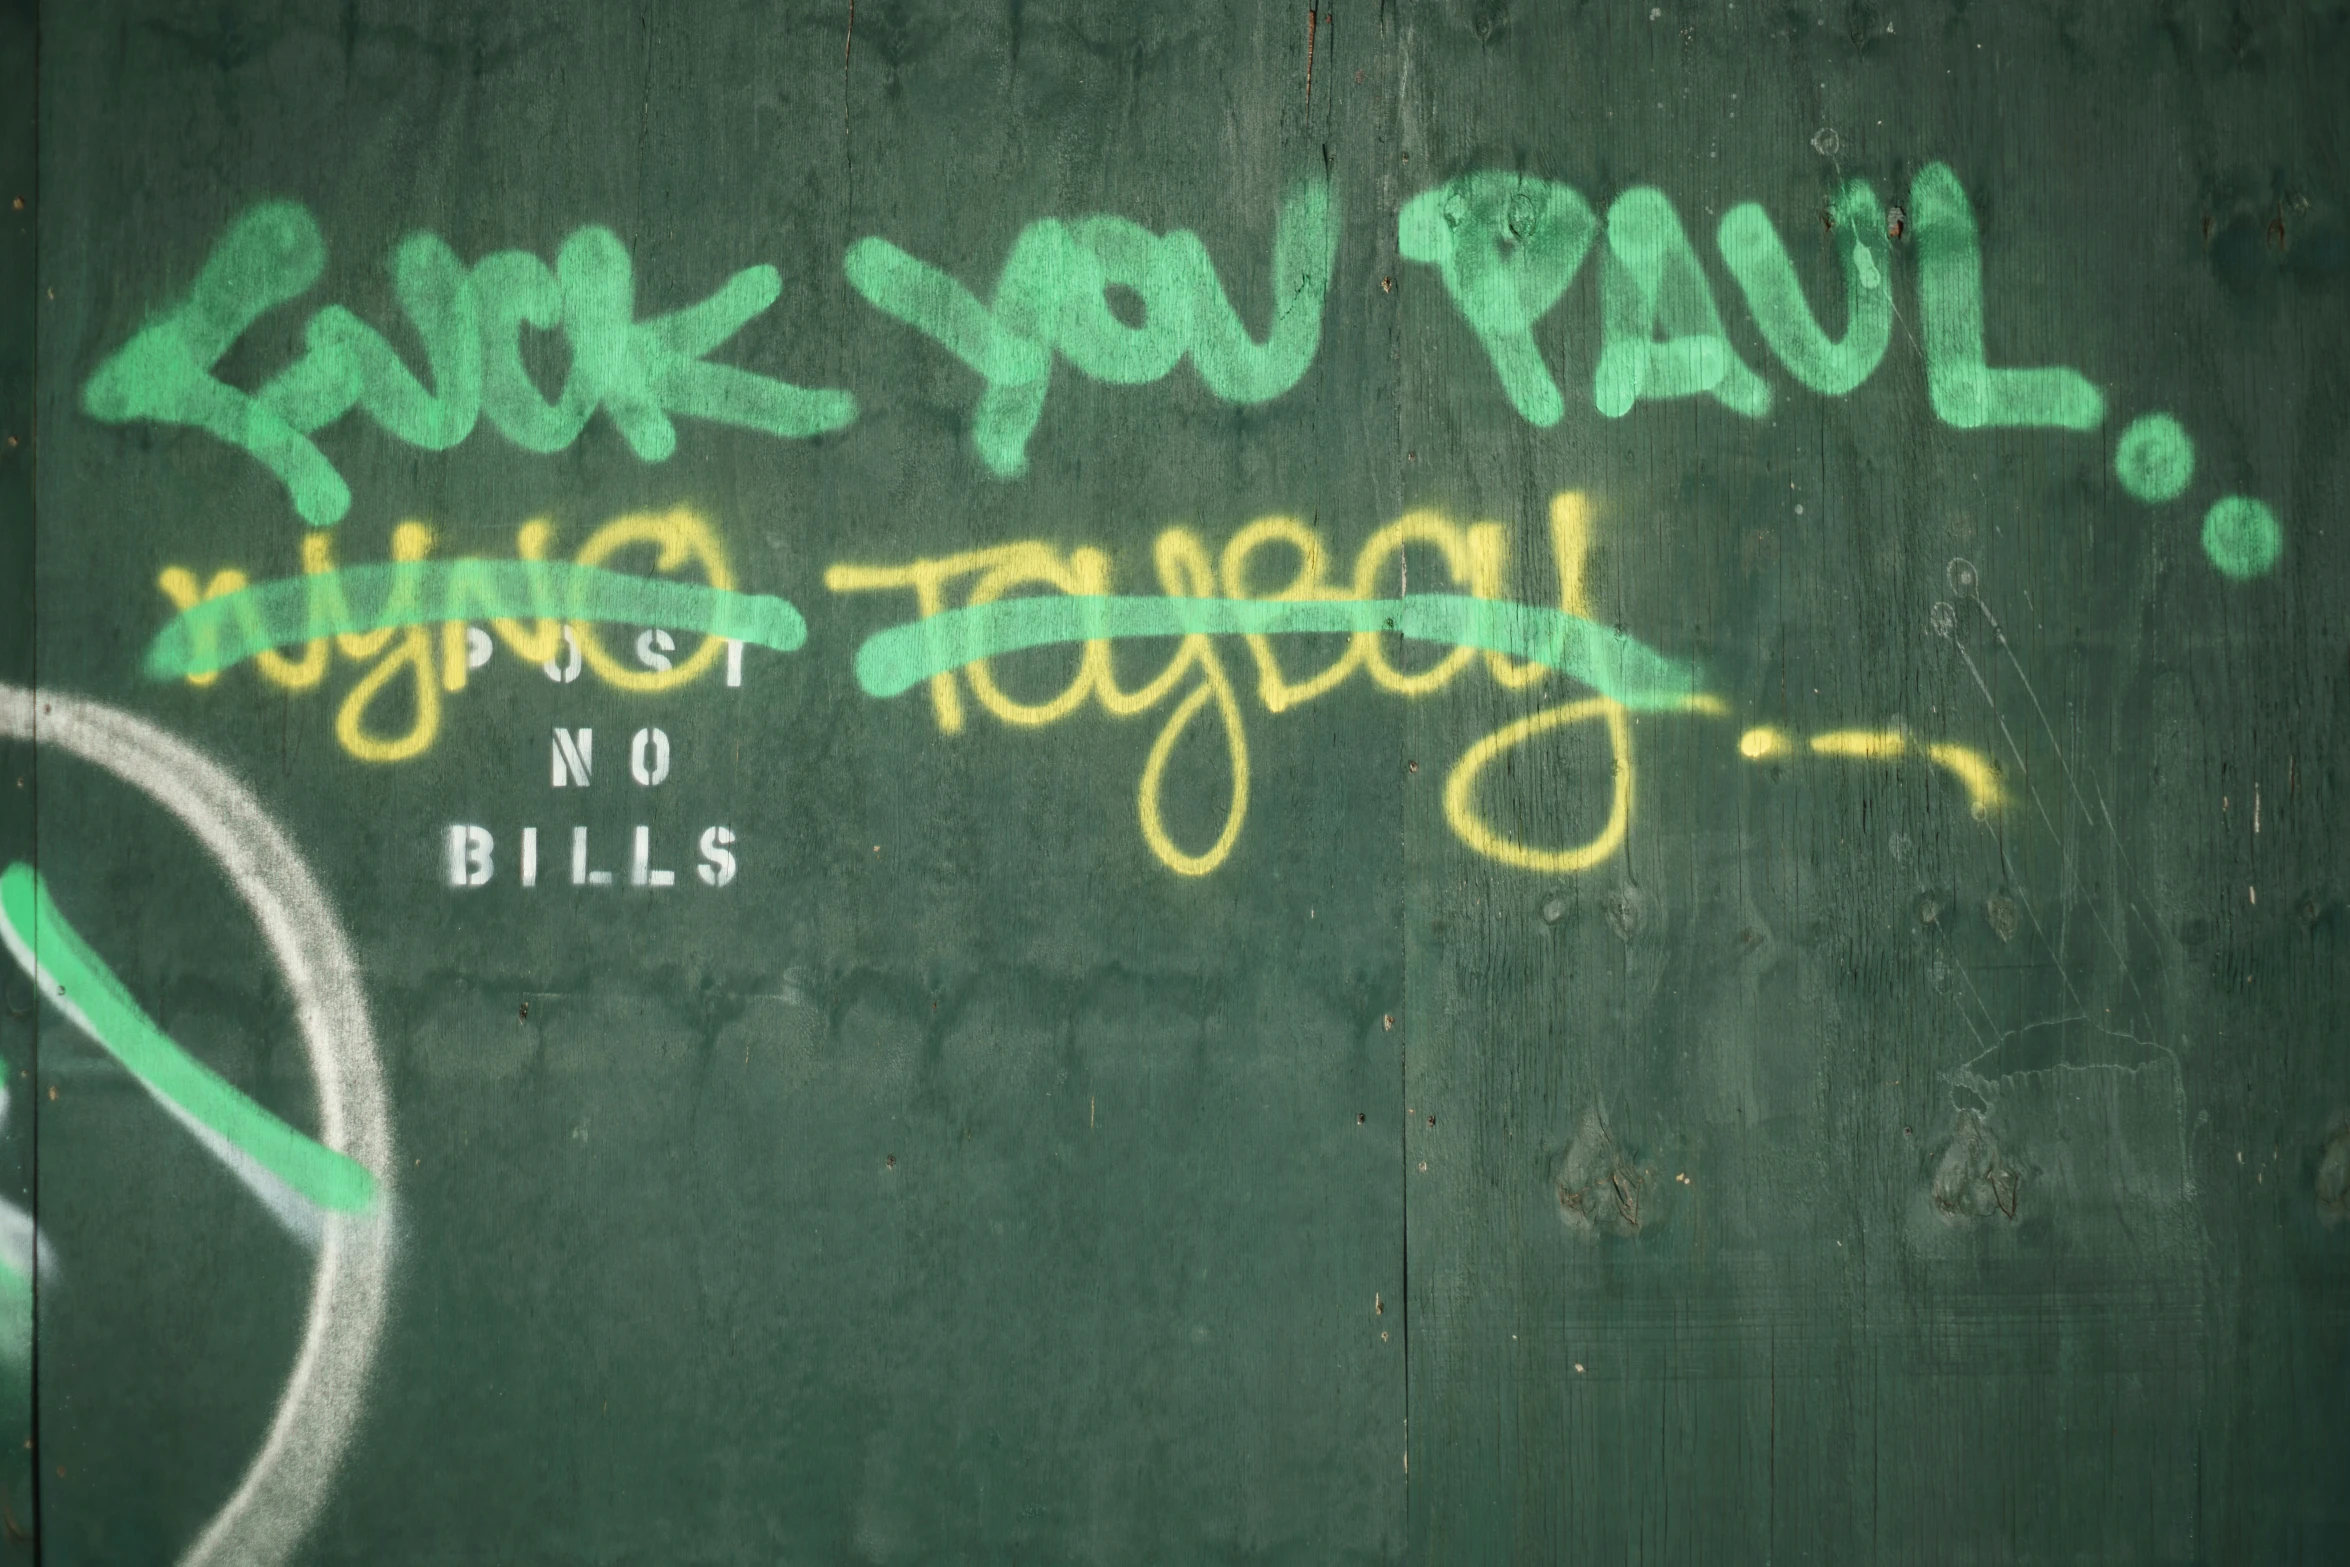 spray painted graffiti written on green board with thank you